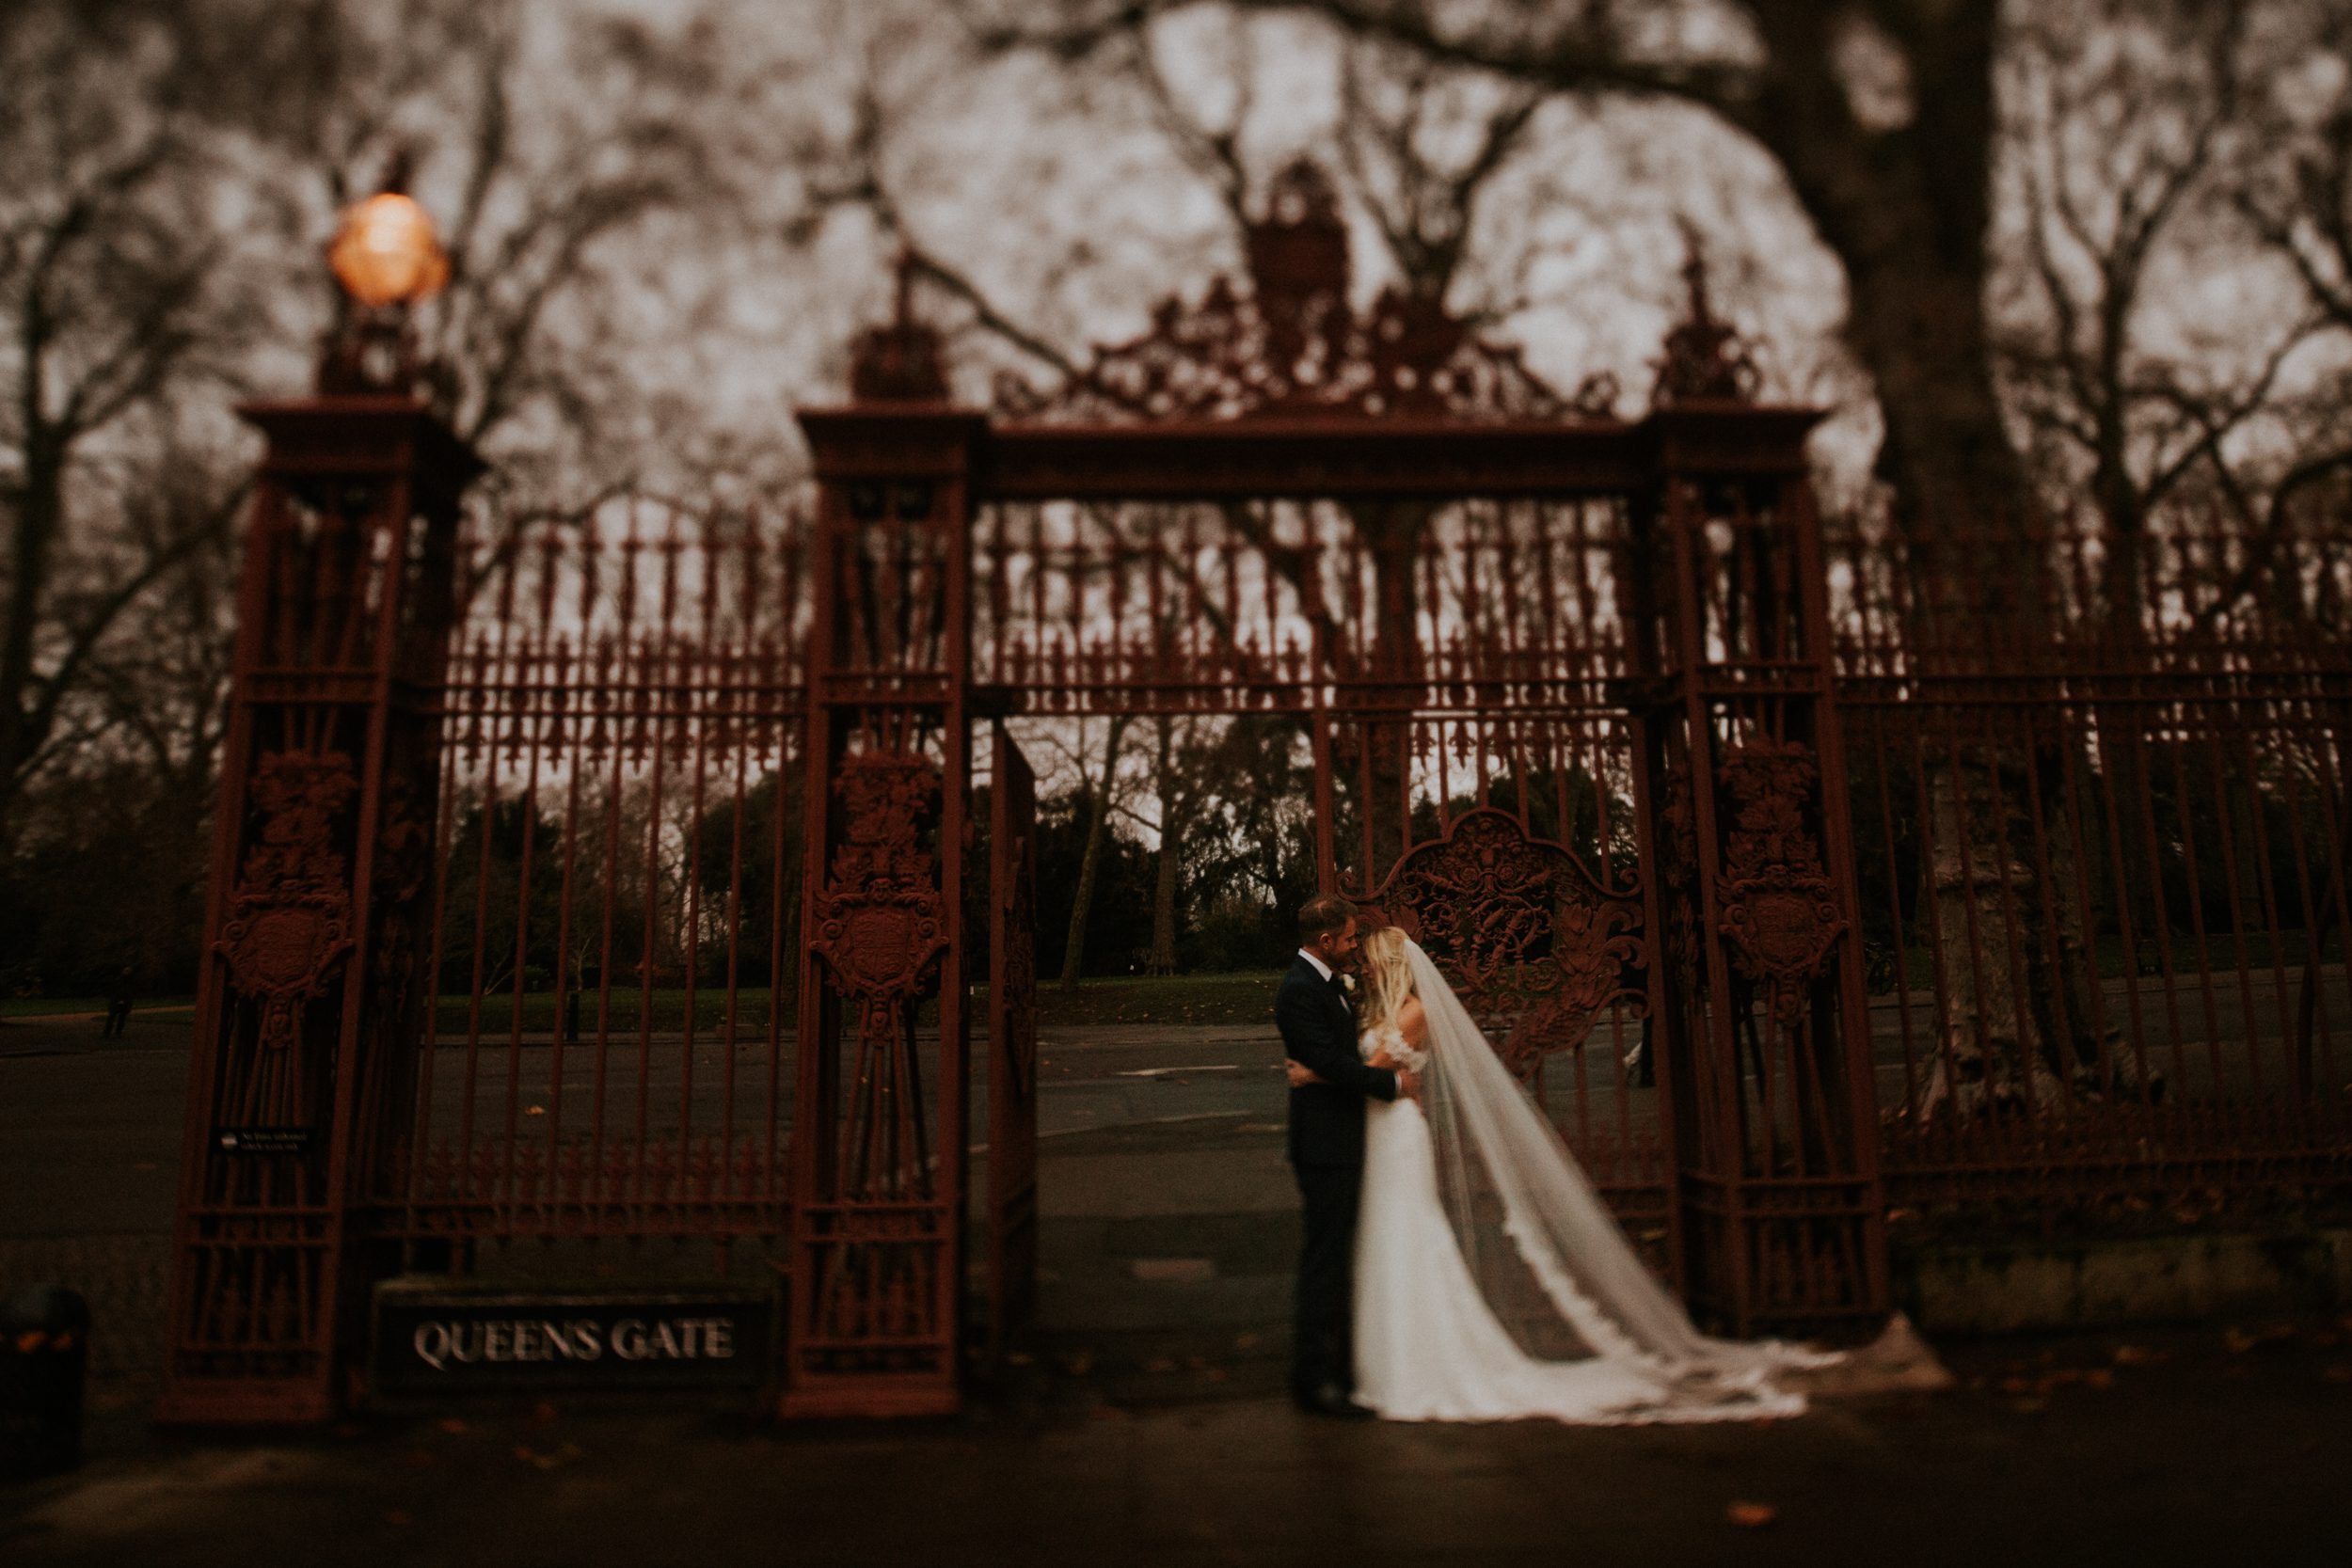 A bridal portrait of a bride and groom kissing in front of Elizabeth Gate in London